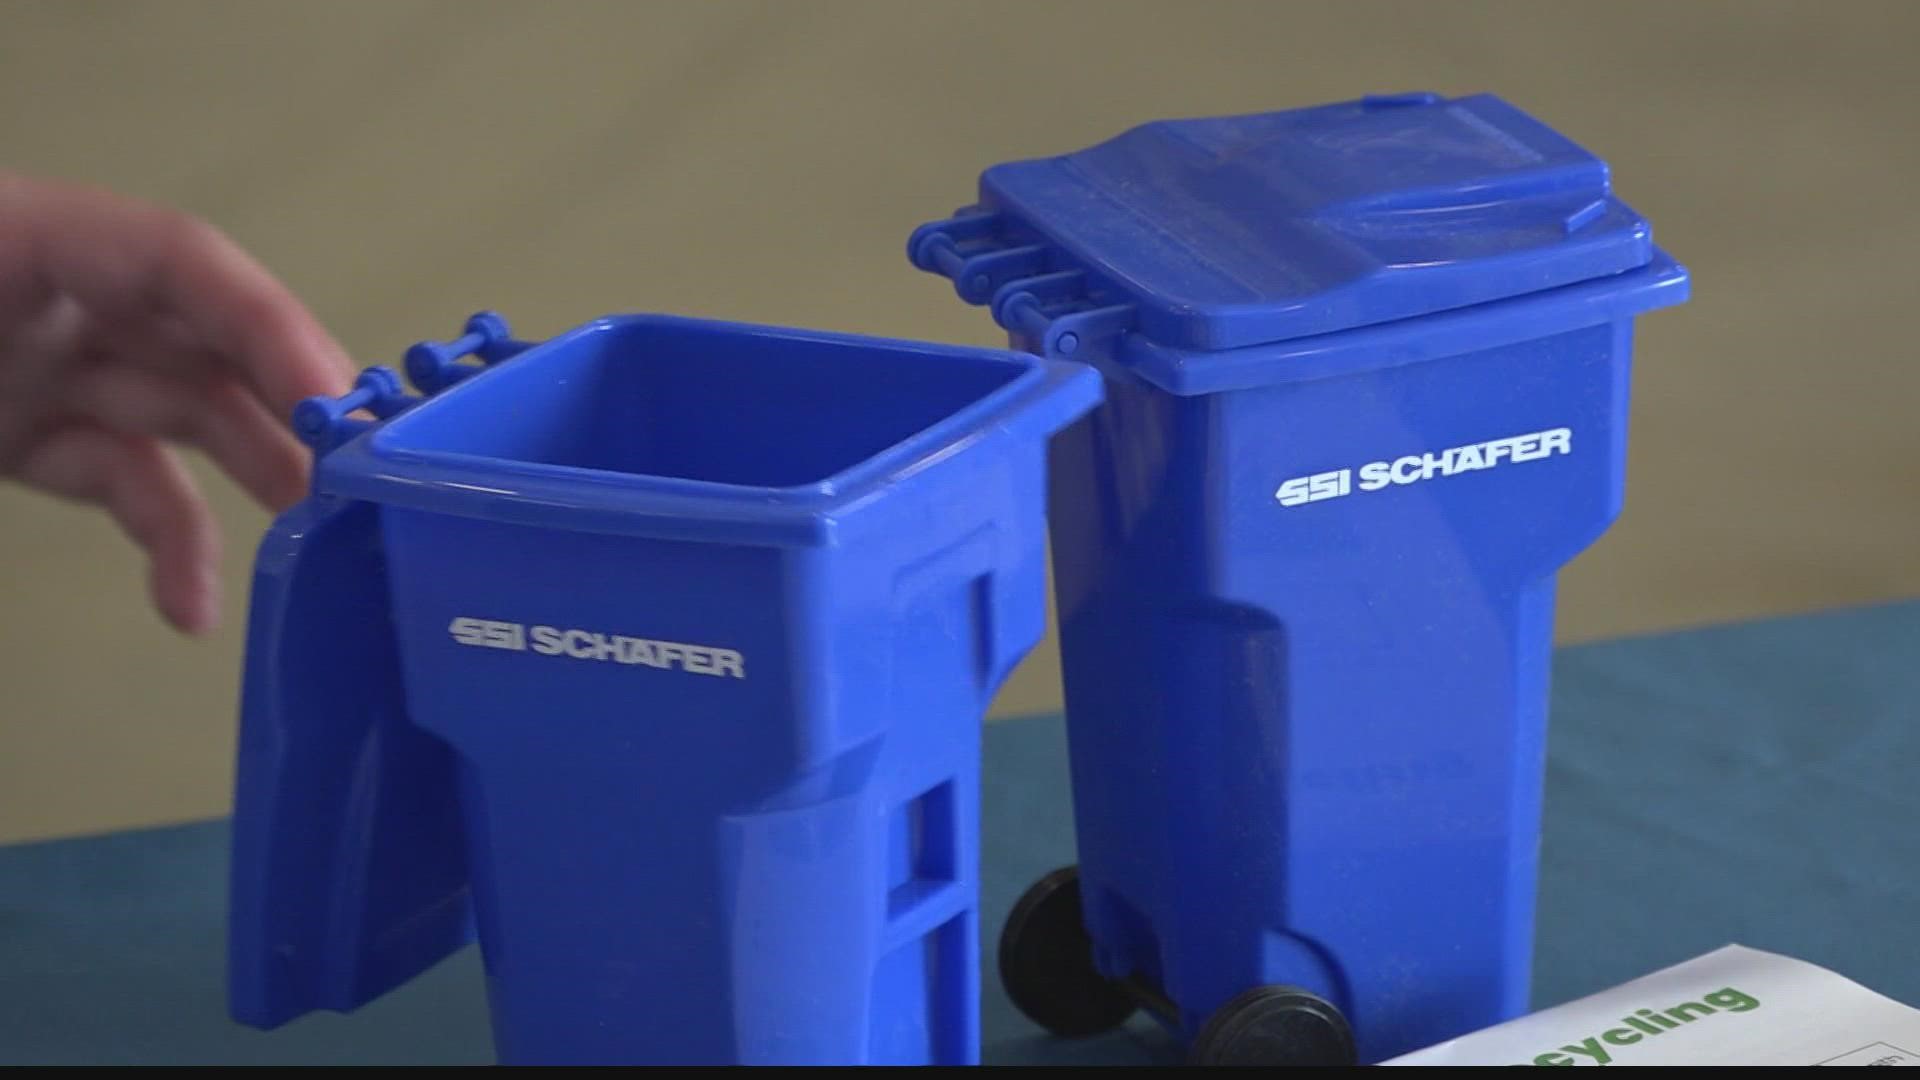 The Alabama Department of Environmental Management has awarded a total of $300,000 in grants between the cities of Huntsville and Madison to aid recycling efforts.